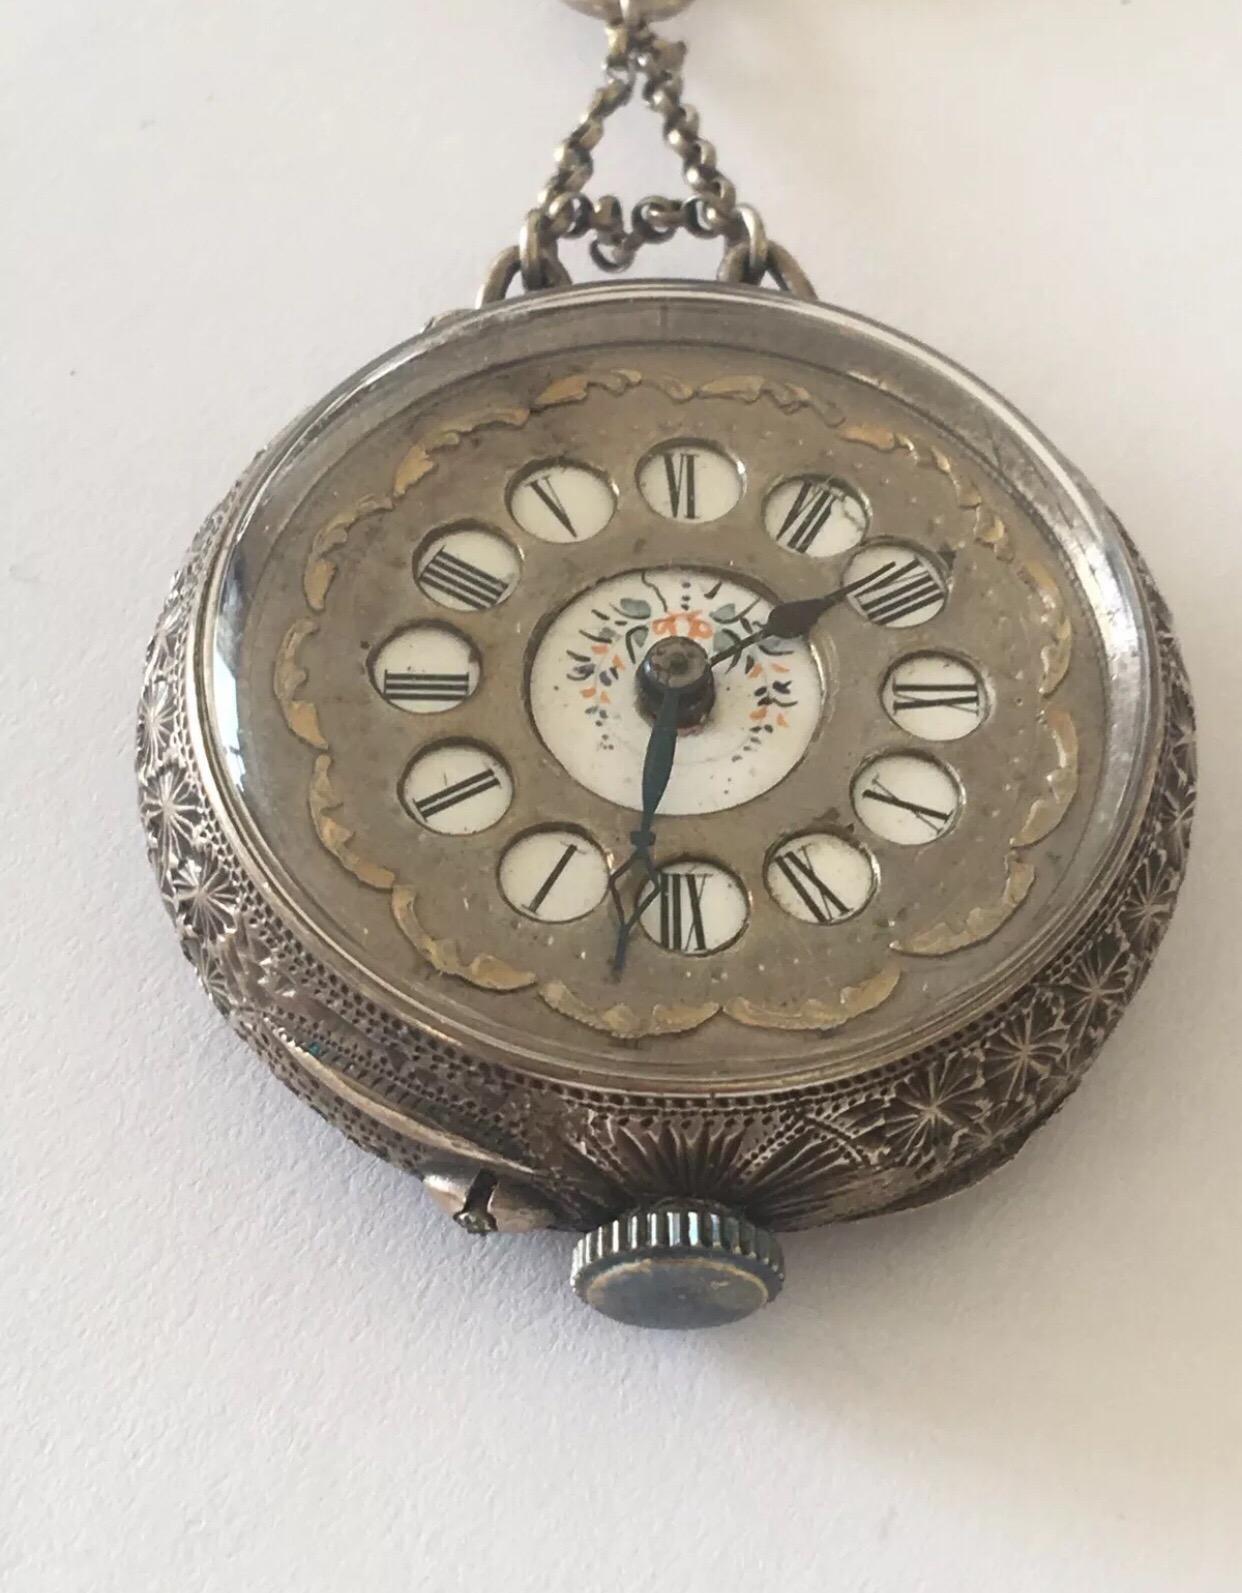 This beautiful ball dial antique silver nurses fob watch is in good working order.